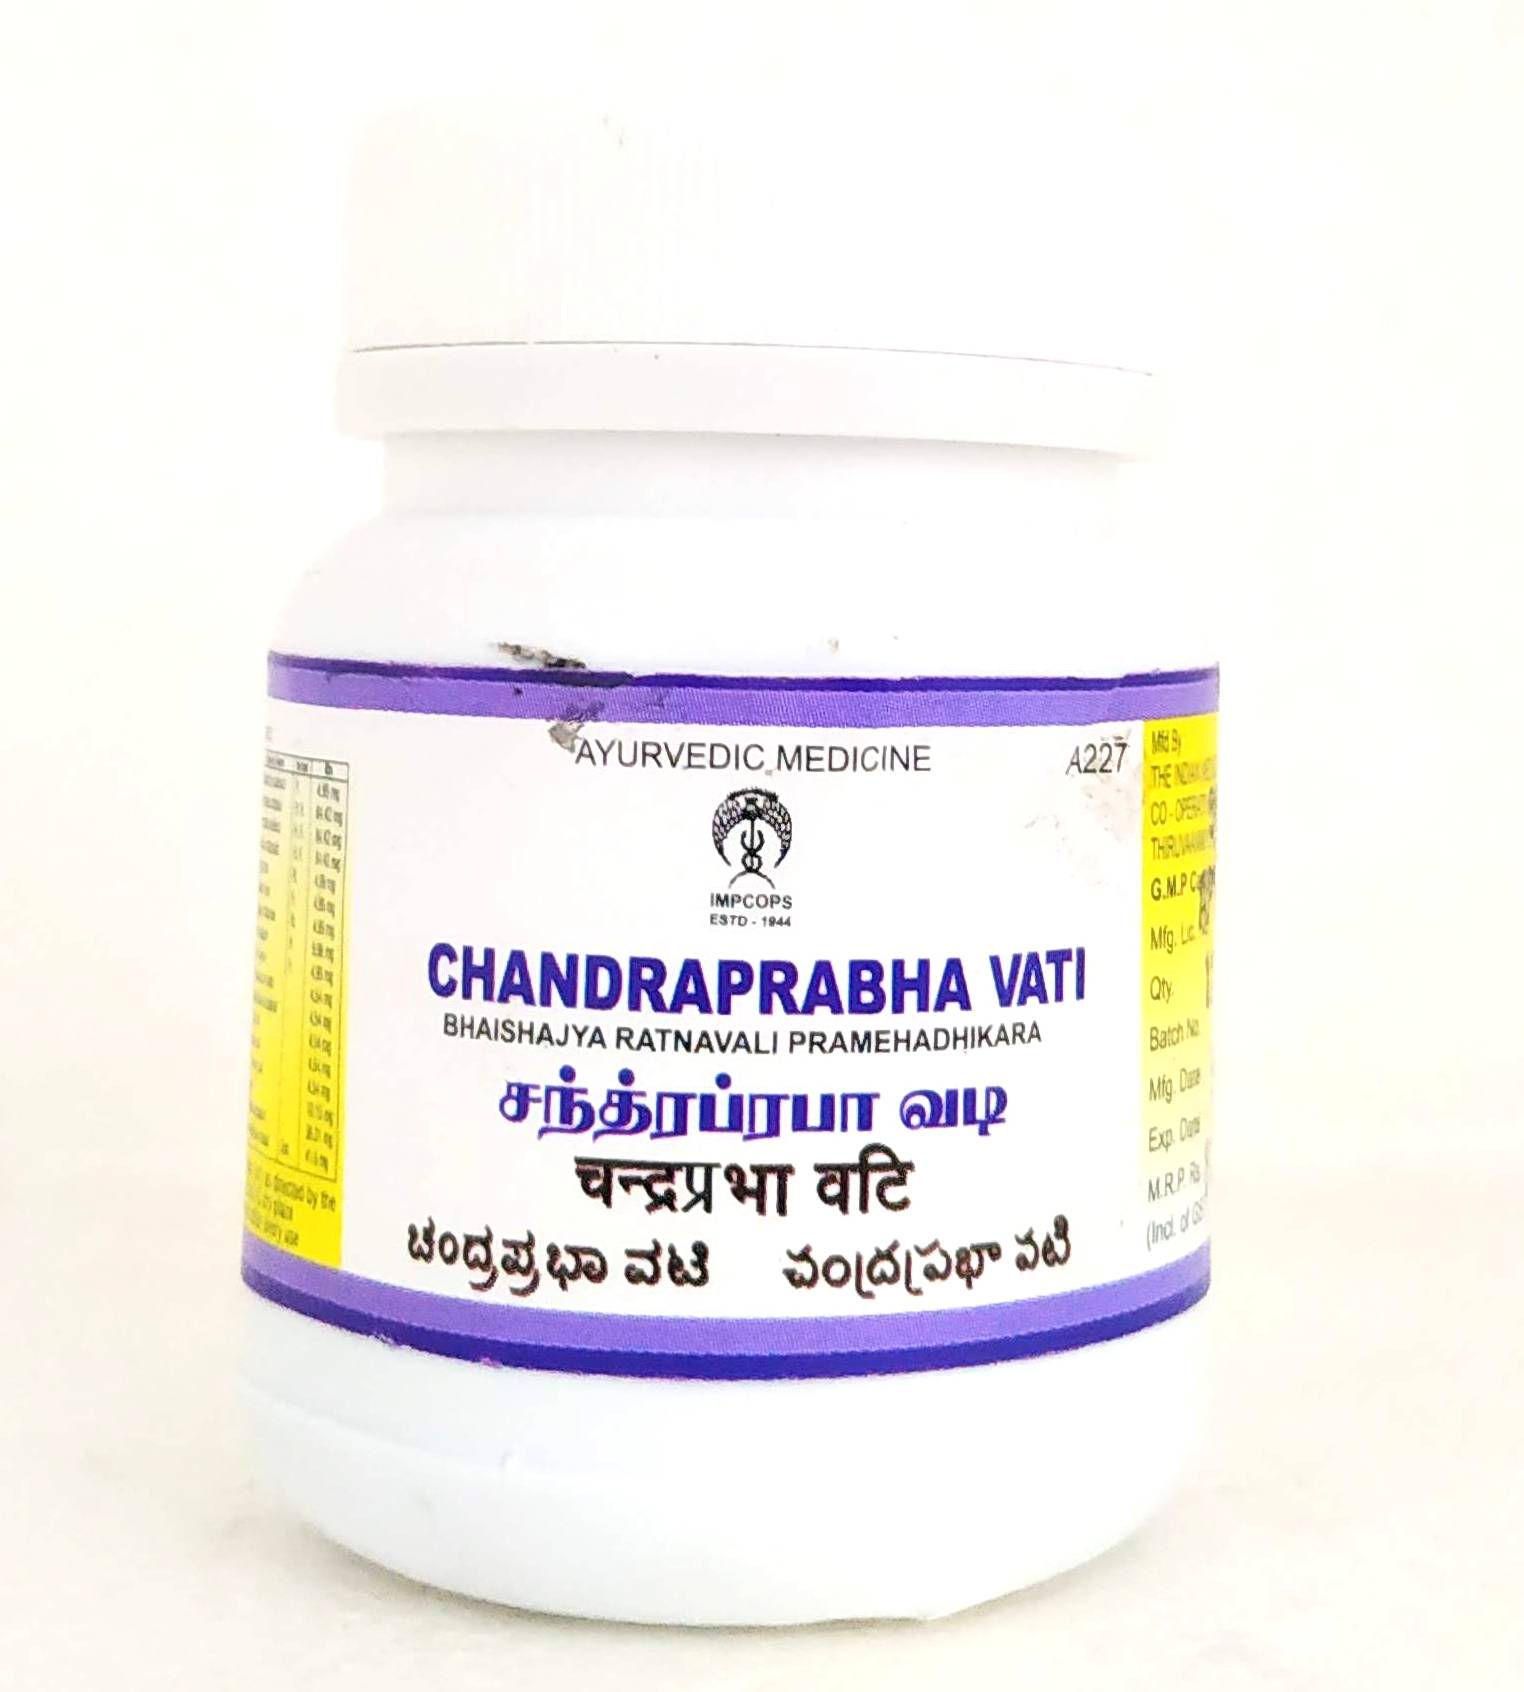 Shop Chandrapraba Vati - 50Tablets at price 82.00 from Impcops Online - Ayush Care